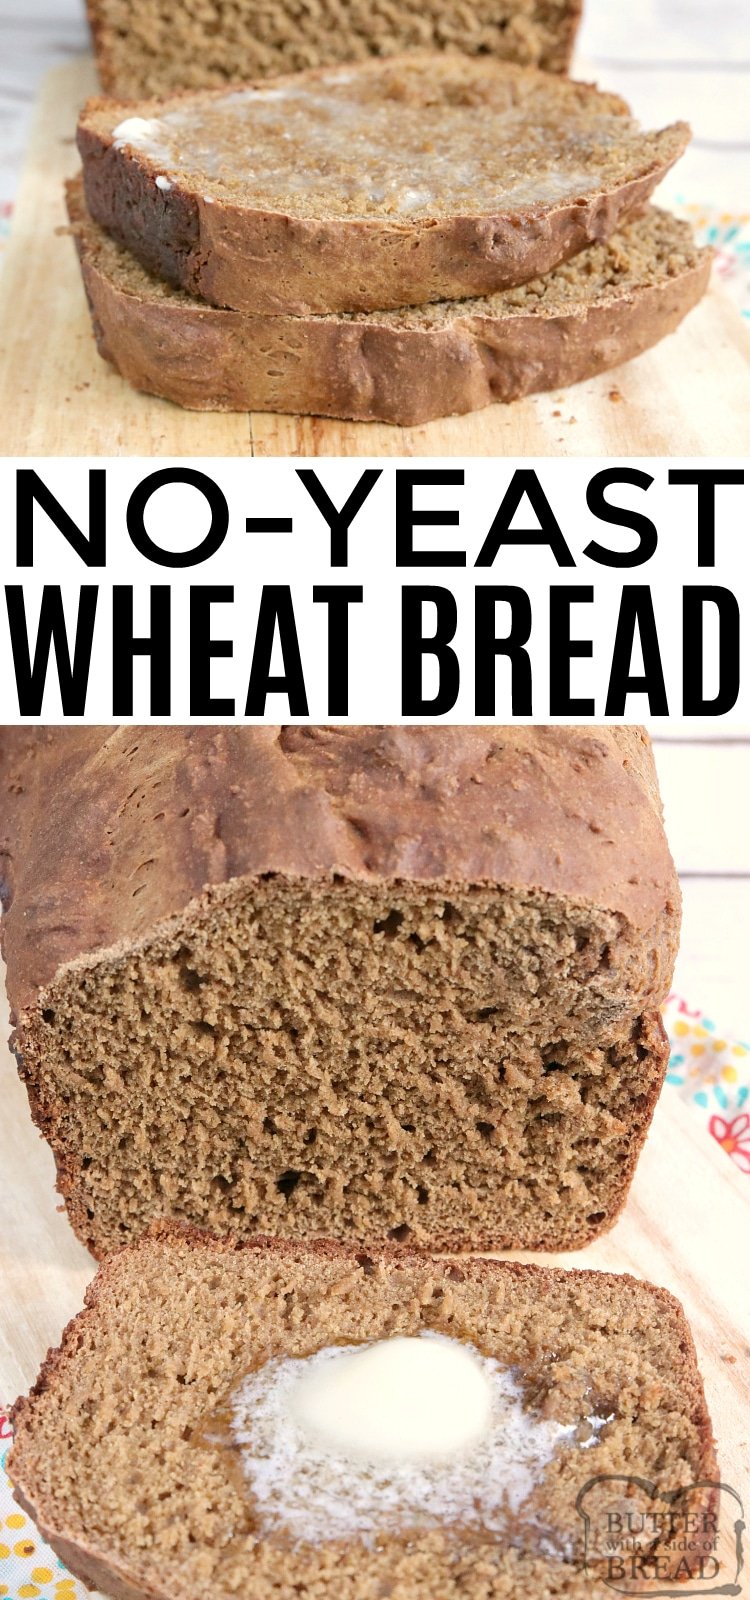 No Yeast Wheat Bread that is made without yeast, no eggs, no mixer or kneading required! This simple bread recipe is sweet, moist and so delicious, it's hard to believe there isn't any yeast in it.